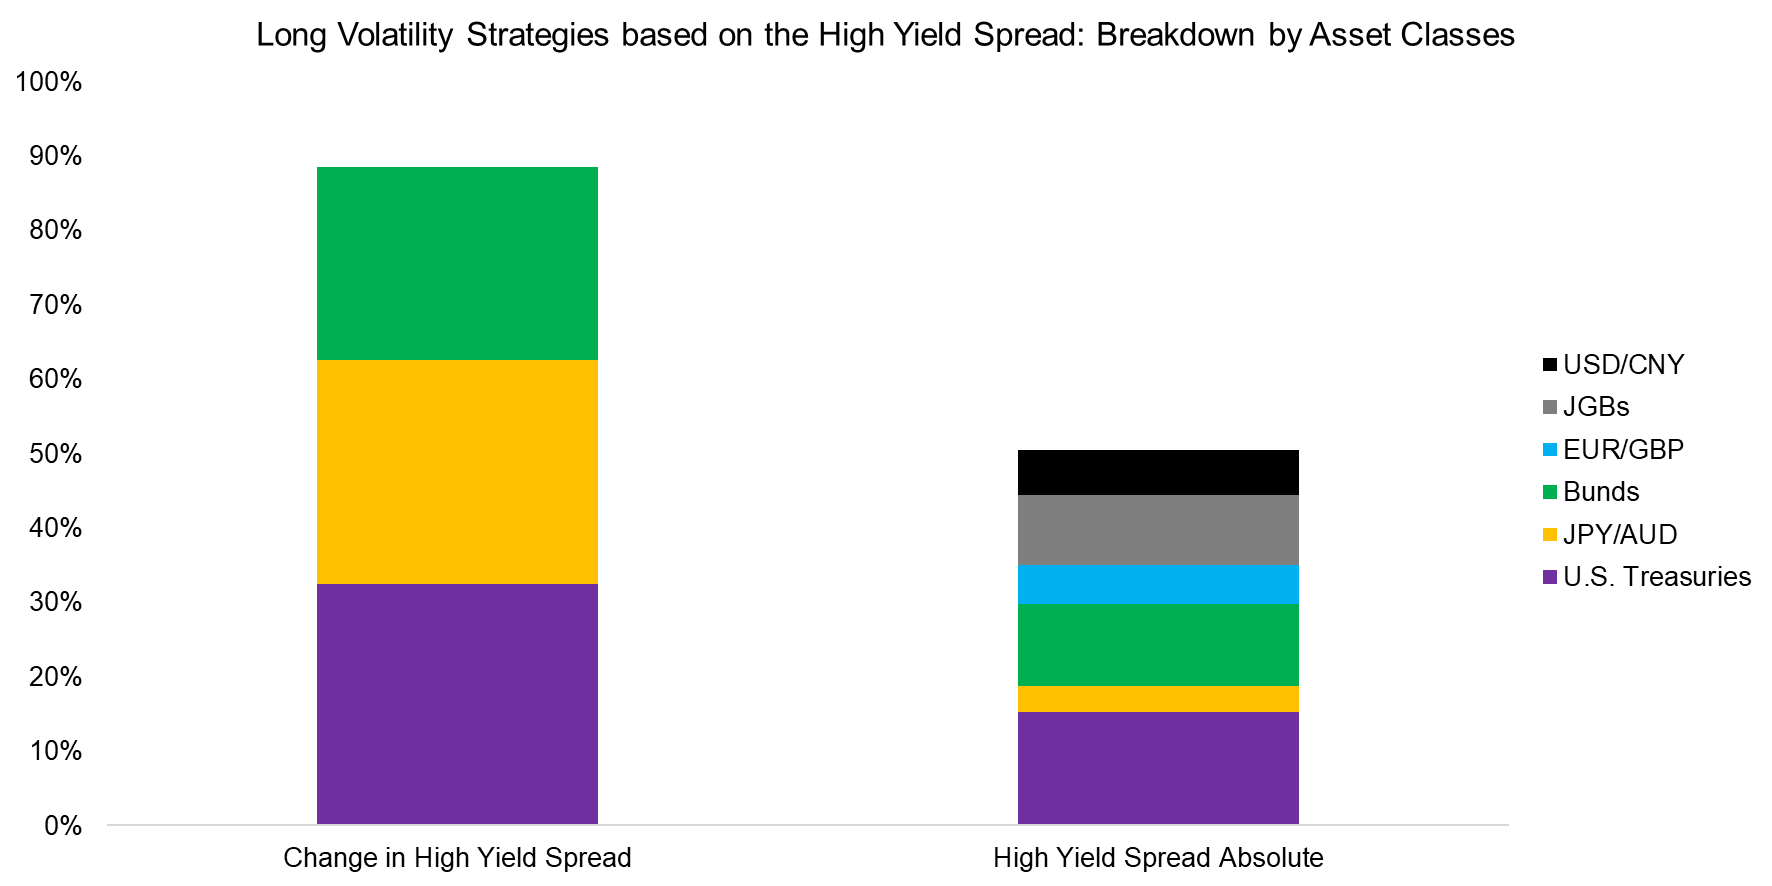 Long Volatility Strategies based on the High Yield Spread Breakdown by Asset Classes